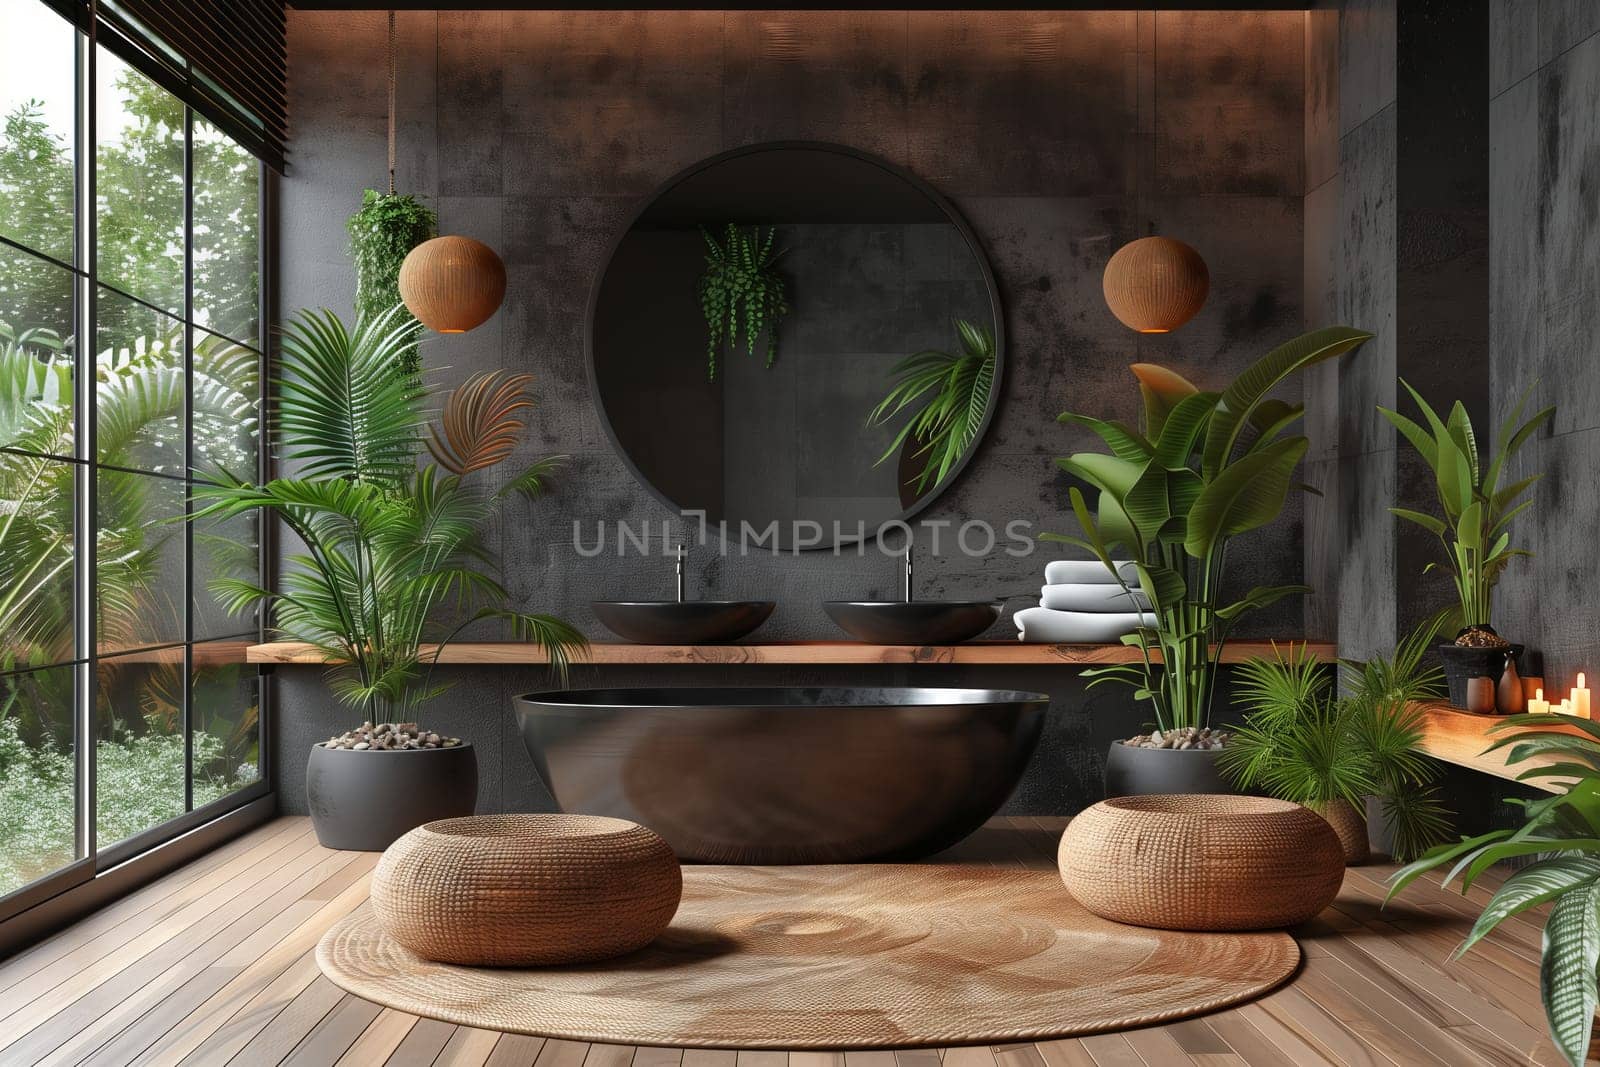 A bathroom featuring a bathtub, sinks, and plants, with a mix of wood and fixtures creating a harmonious interior design